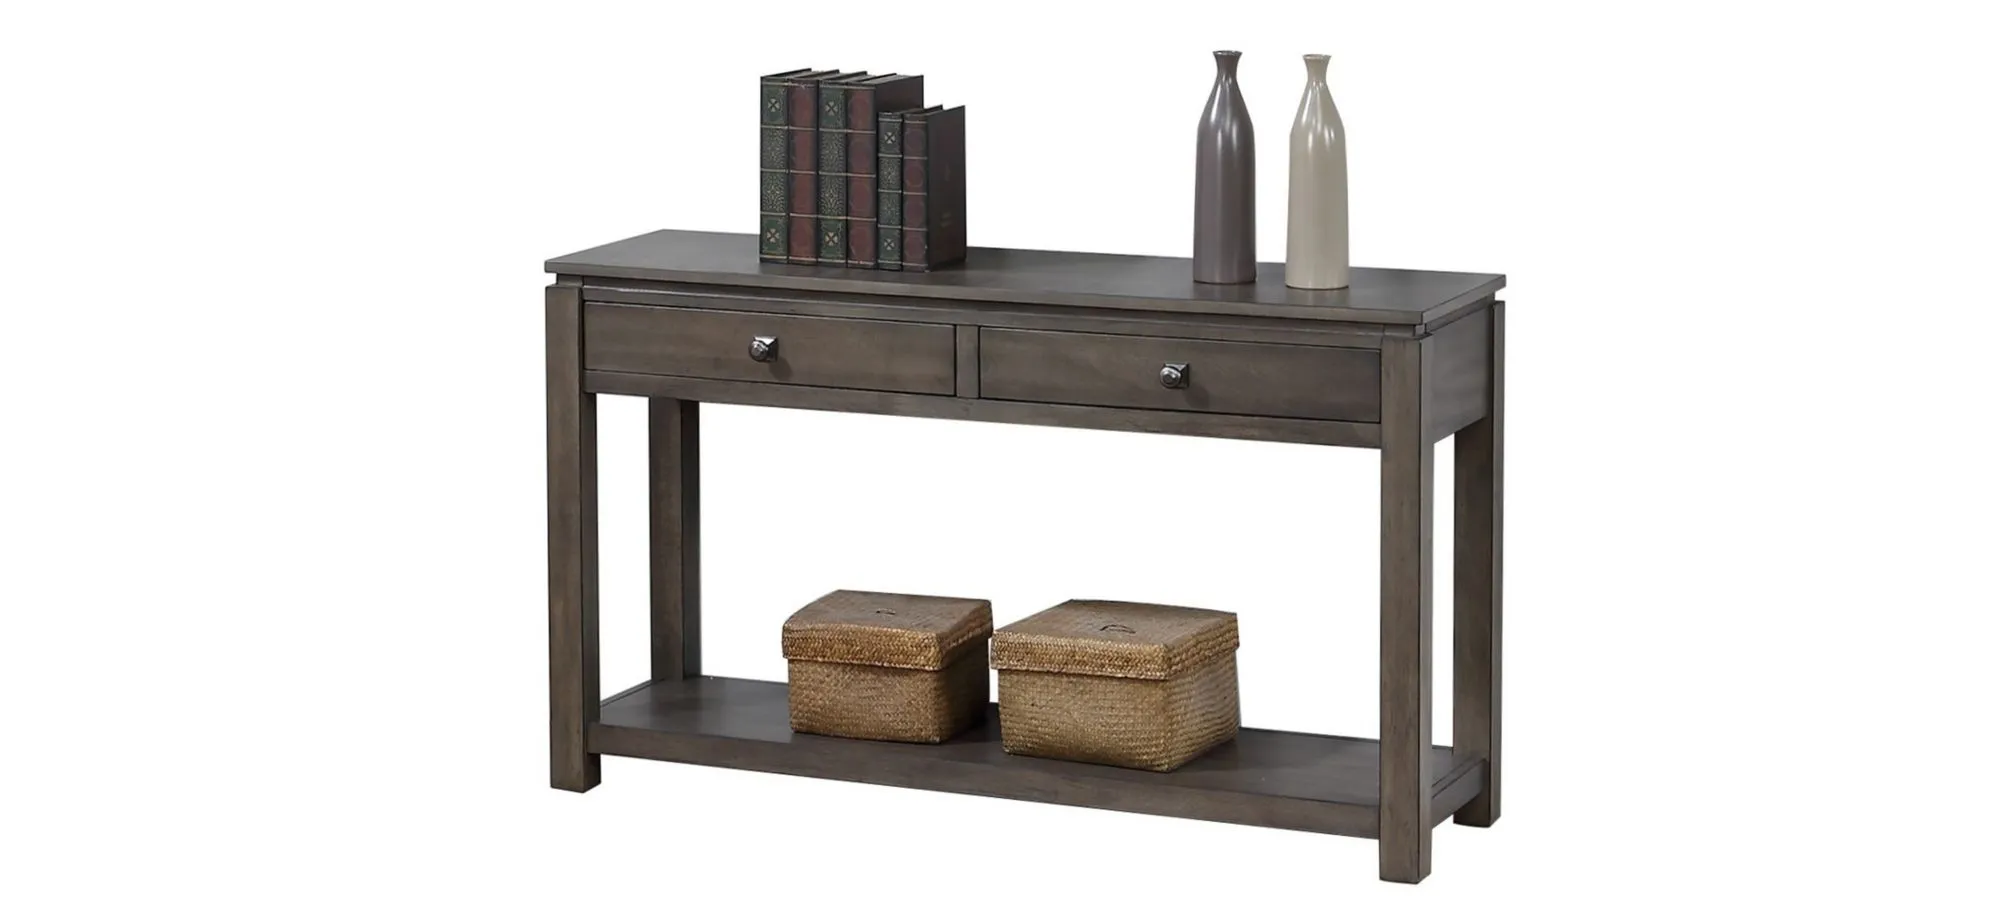 Eastlane Rectangular Sofa Console in Weathered Gray by Sunset Trading